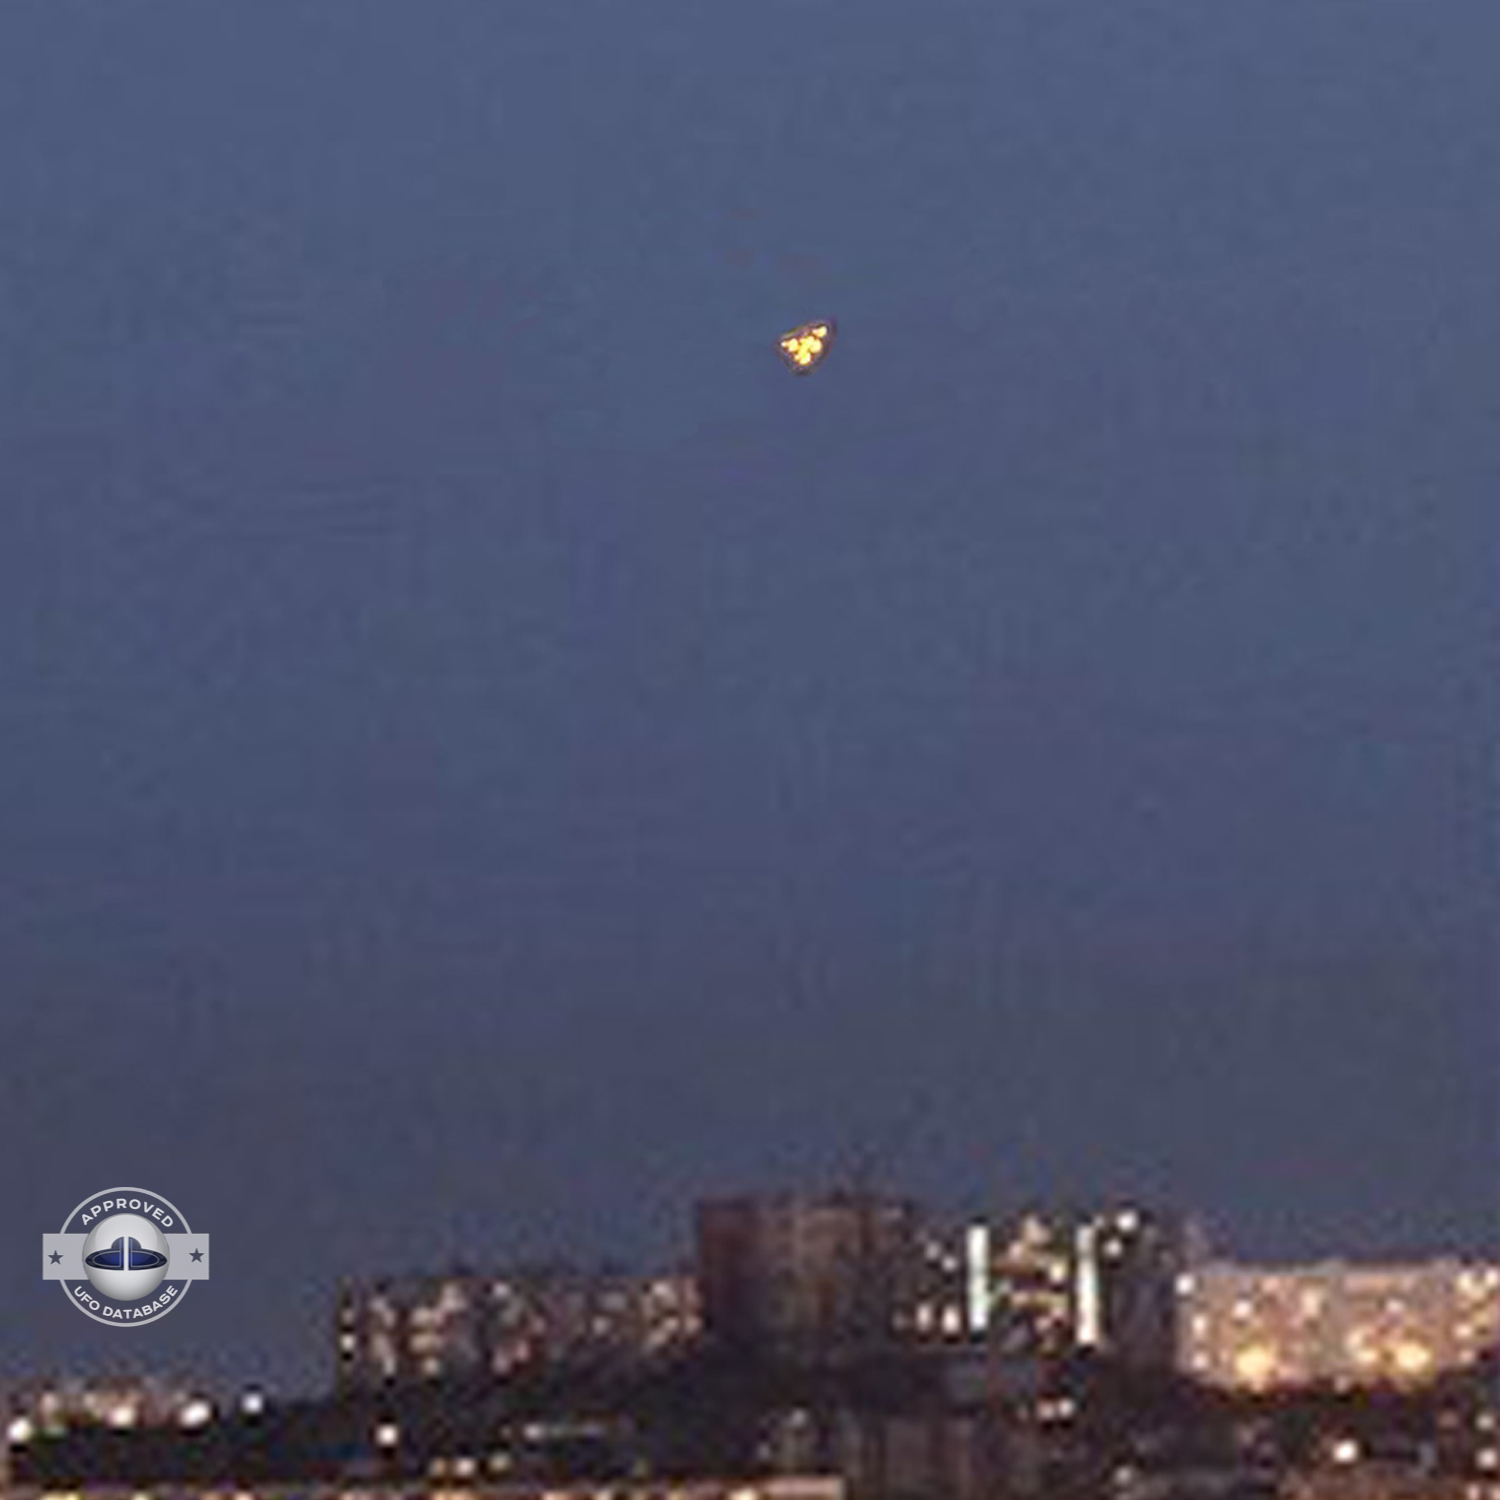 UFO seen by hundreds in Vladivostok | Russia UFO picture | 2010 UFO Picture #167-3